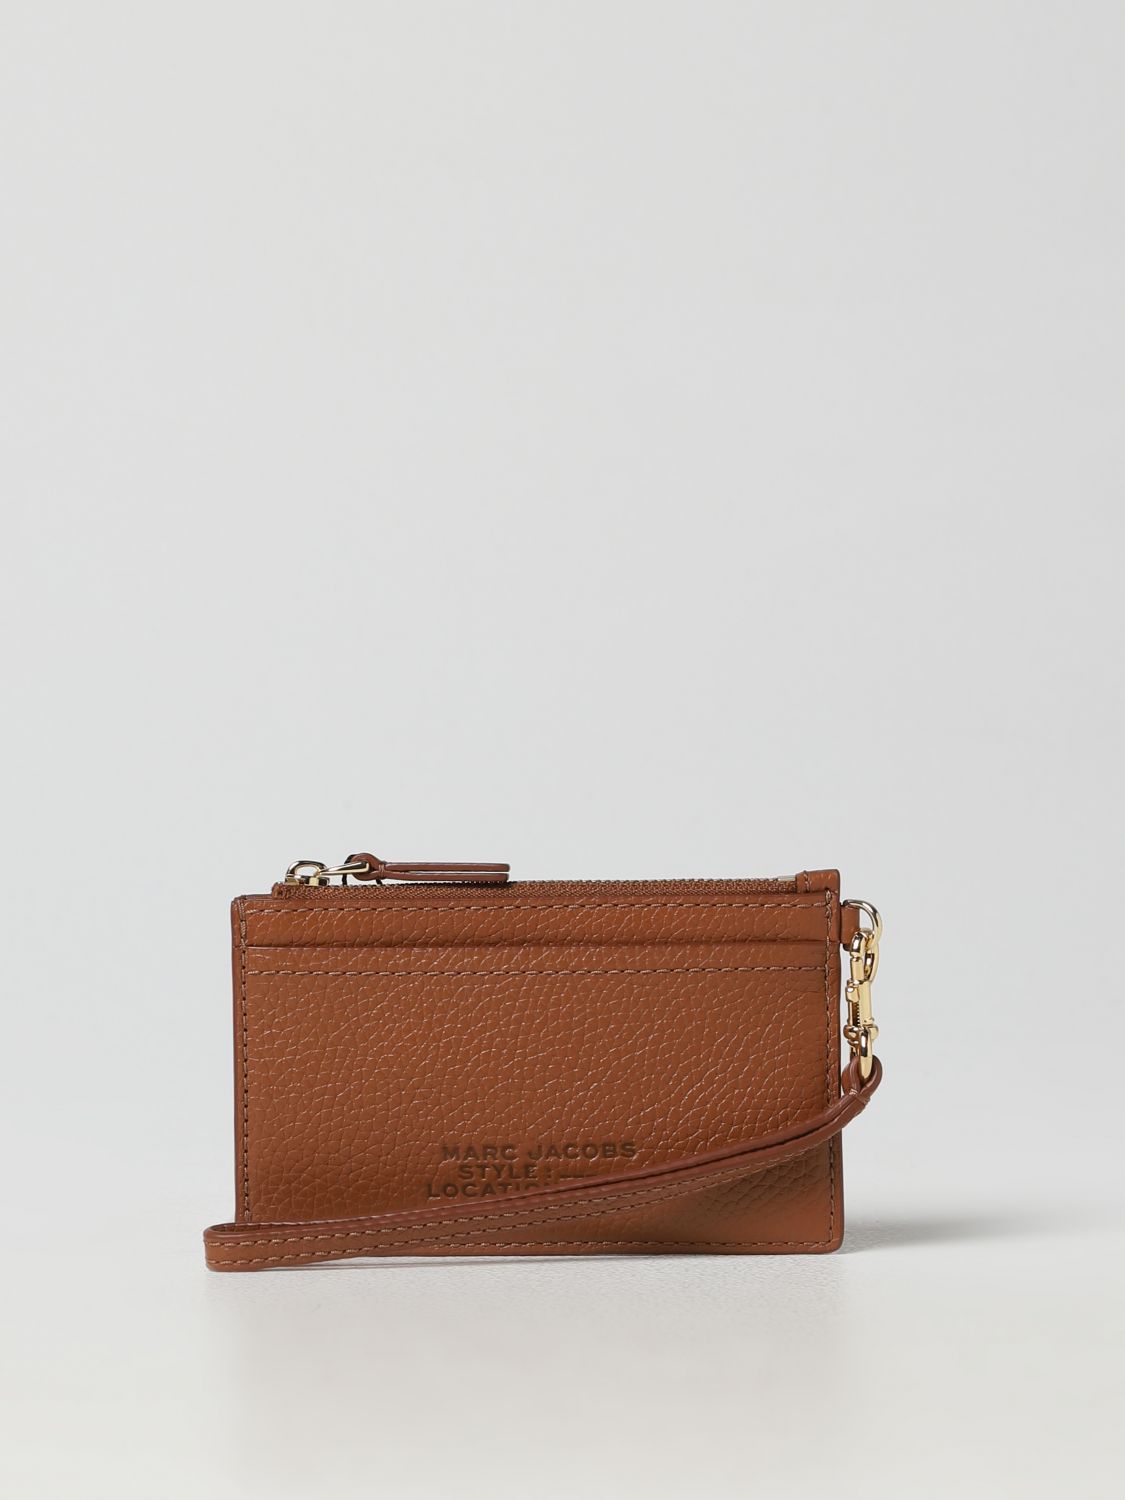 MARC JACOBS CREDIT CARD HOLDER IN GRAINED LEATHER,E47123032